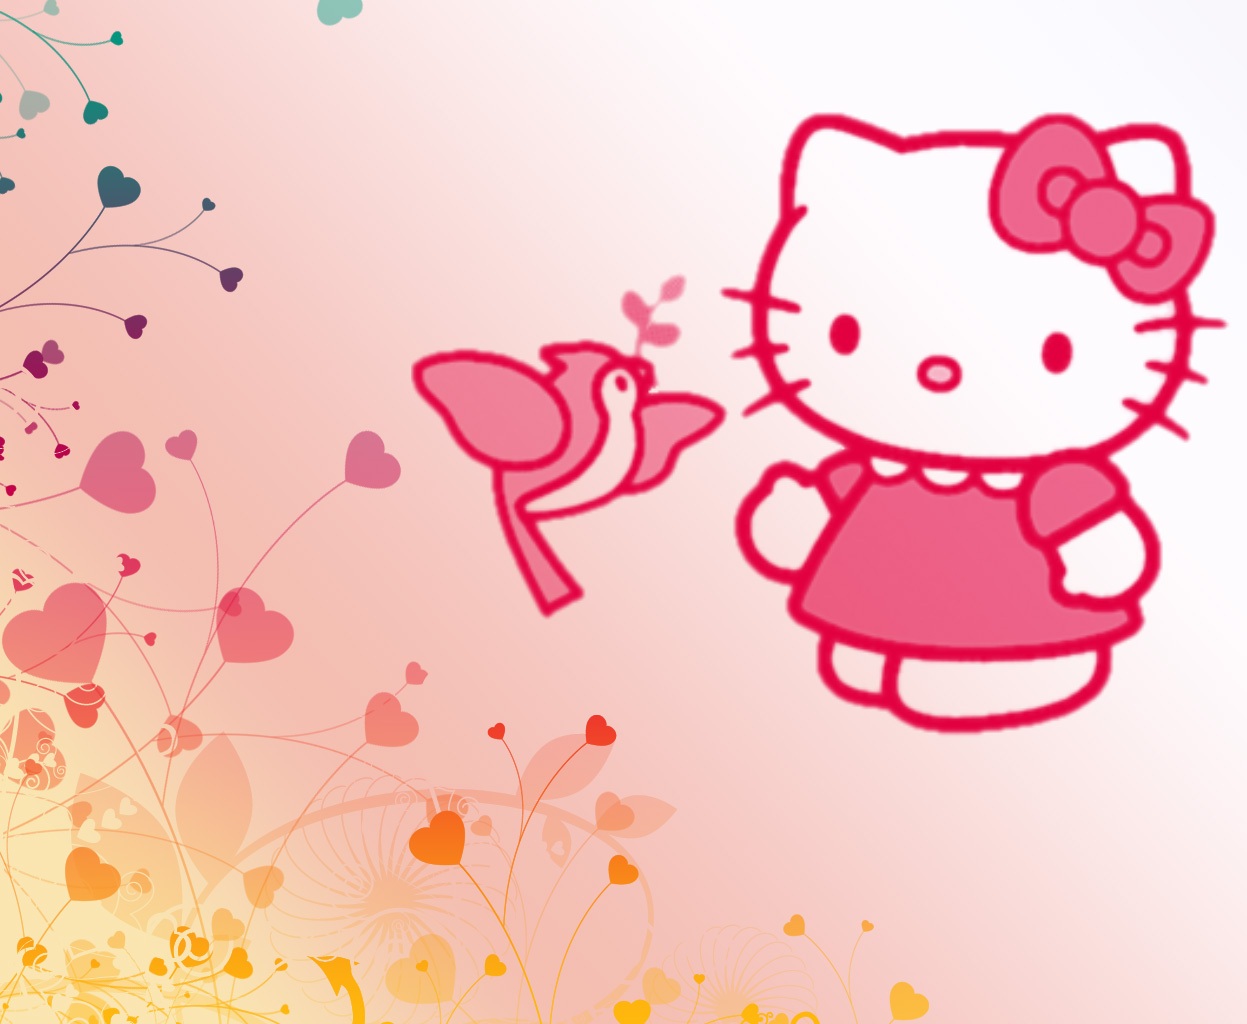 WALLPAPER ANDROID IPHONE Wallpaper Hello Kitty HD